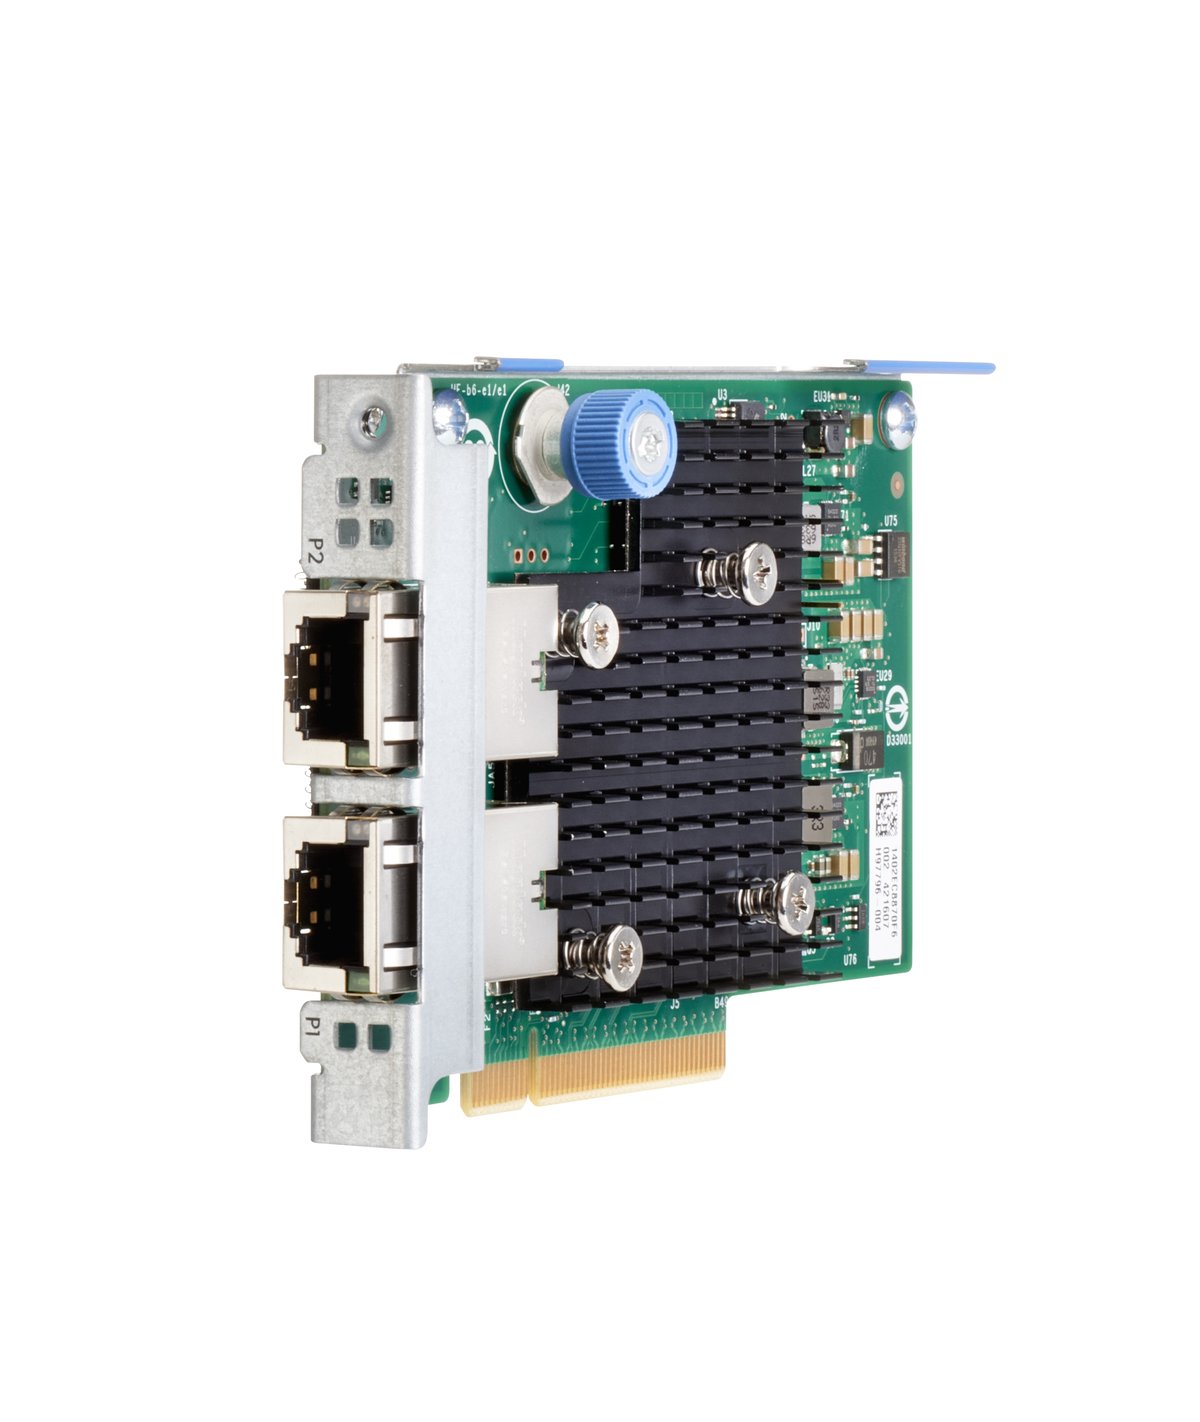 HPE 562FLR-T - network adapter - PCIe 3.0 x4 - 10Gb Ethernet x 2